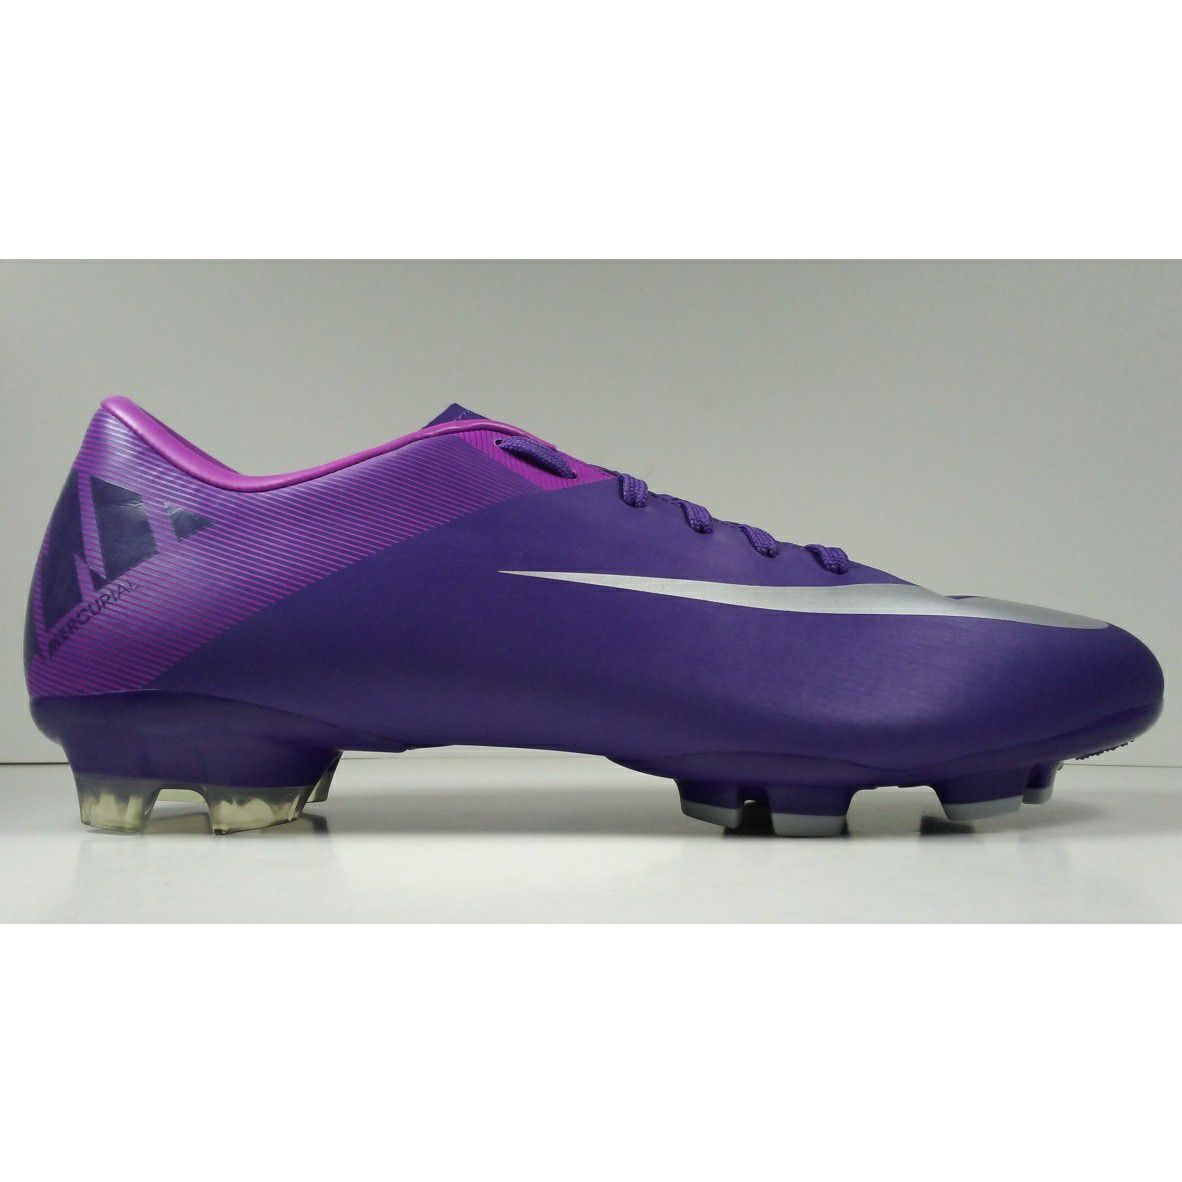 Rare! Nike Mercurial Victory ll 442005-505 Purple Mens Size 9 for Sale in Bakersfield, CA - OfferUp